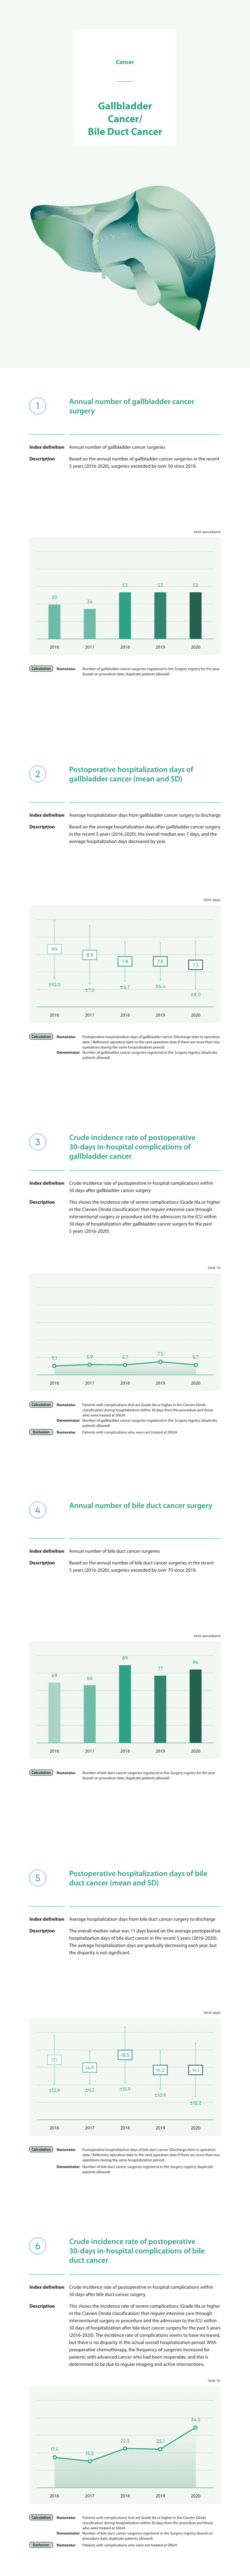 gallbladder cancer, Annual number of gallbladder cancer surgeries, Based on the annual number of gallbladder cancer surgeries in the recent 5 years (2016-2020), surgeries exceeded by over 50 since 2018.